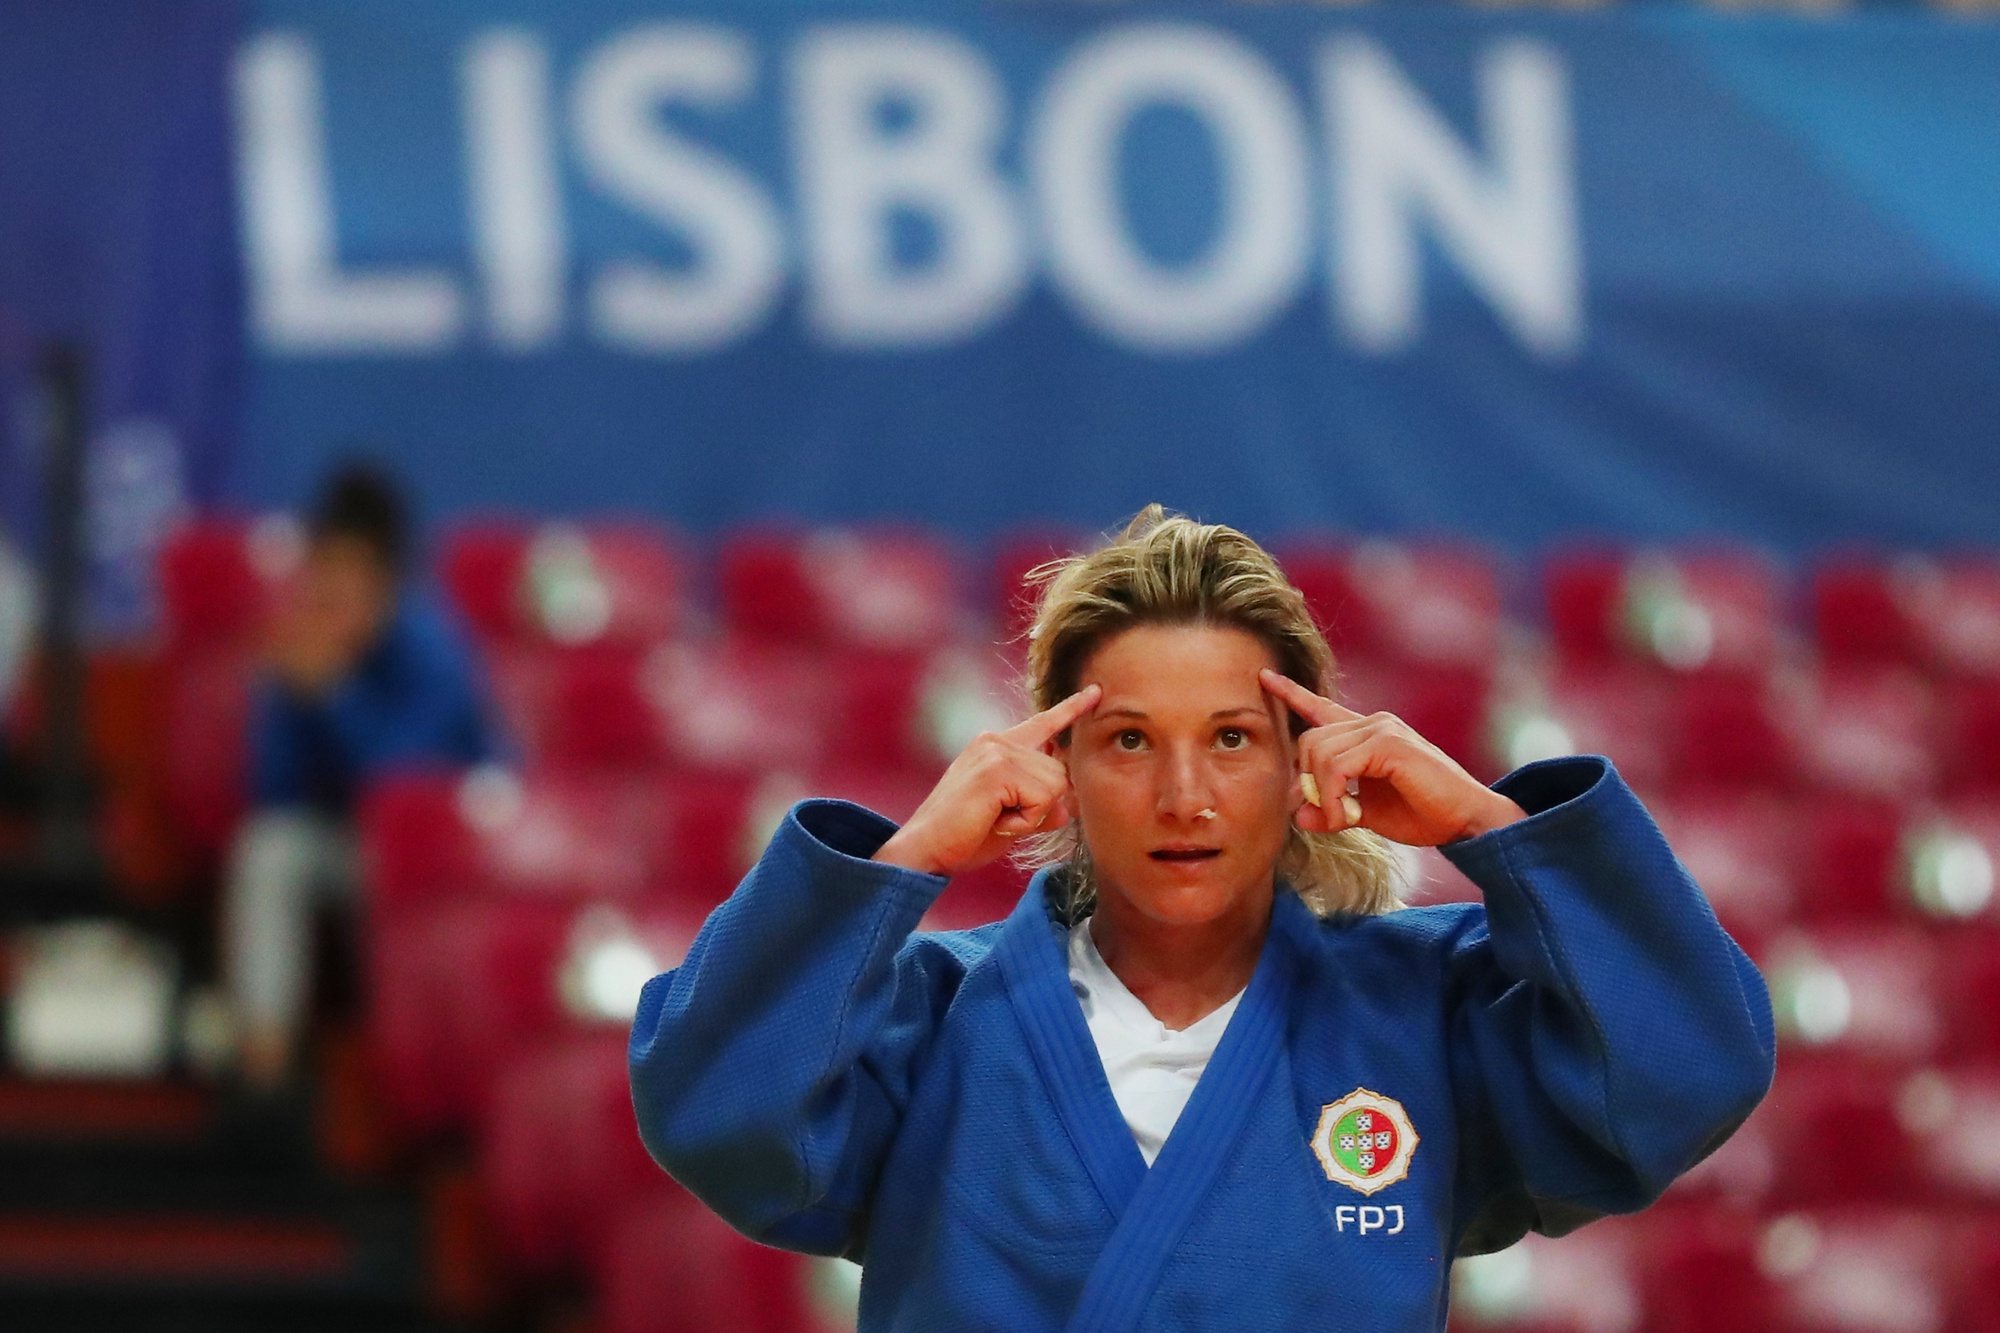 Telma Monteiro of Portugal ( blue) celebrates at the end of the match against Nora Gjakova of Kosovo during the semi-finals match in the woman&#039;s -57kg category at the European Judo Championships in Lisbon, Portugal, 16 April 2021. NUNO VEIGA/LUSA